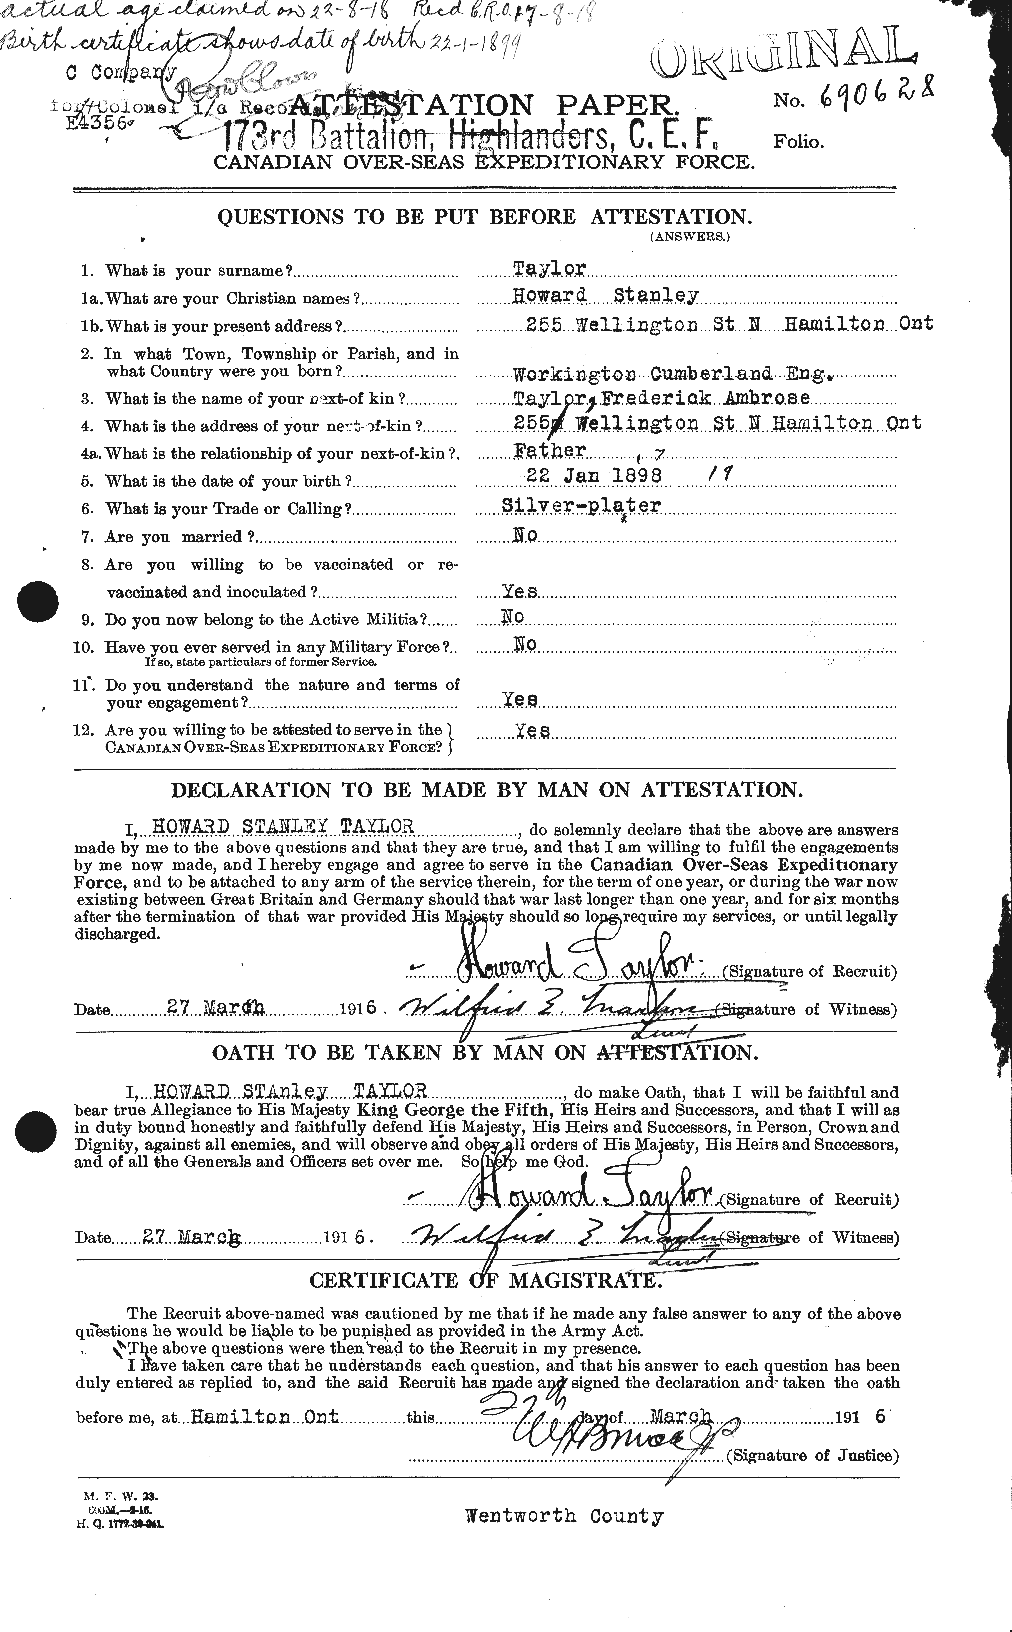 Personnel Records of the First World War - CEF 626603a